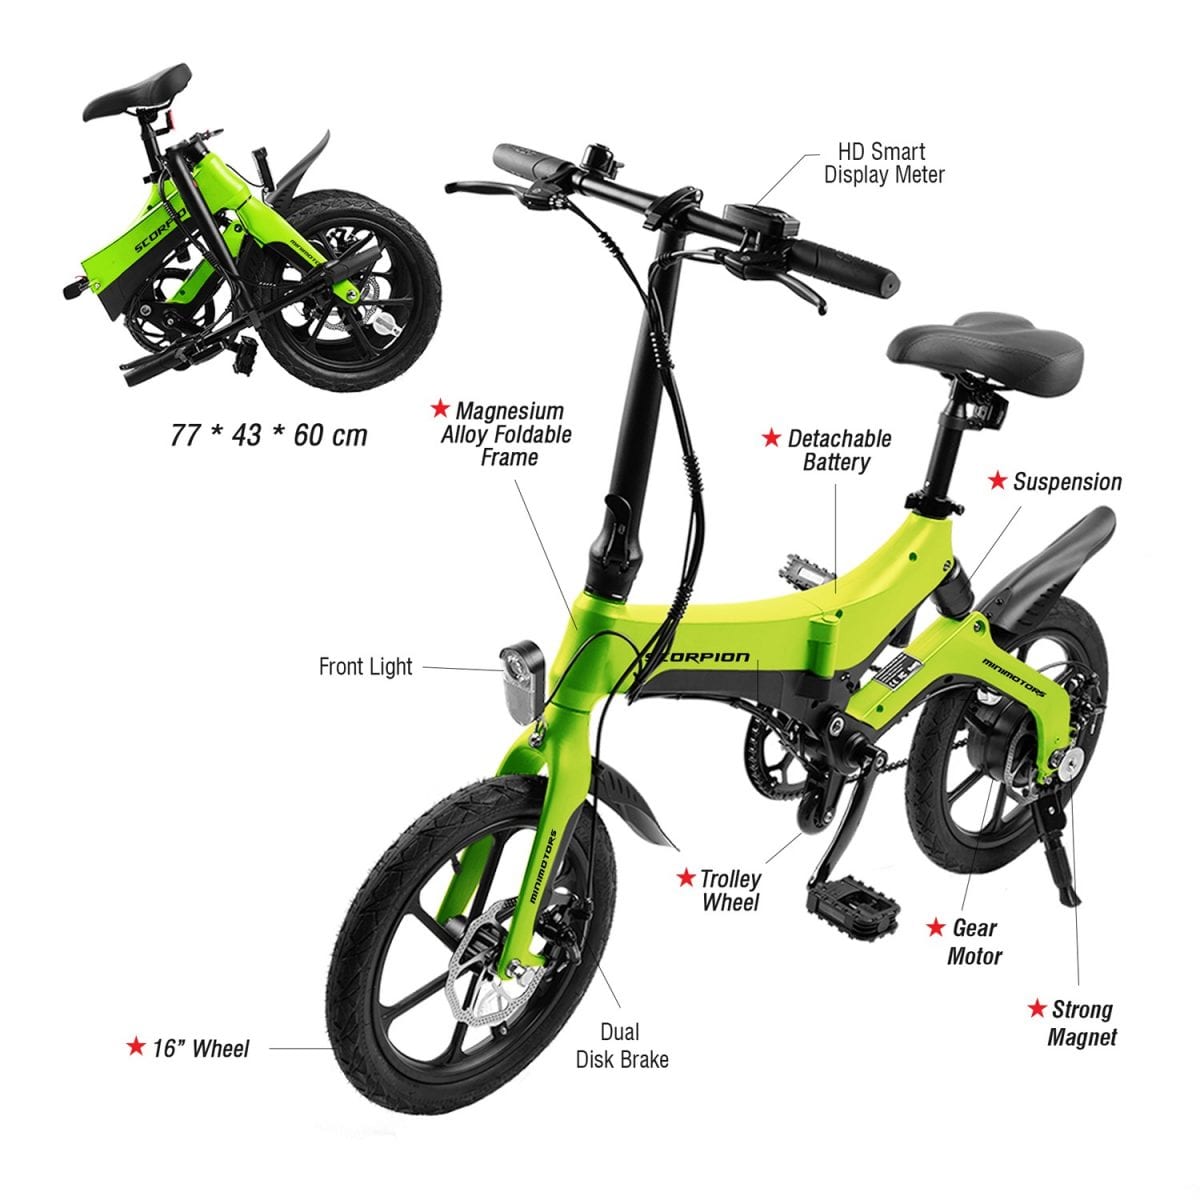 Scorpion Electric Bicycle Details